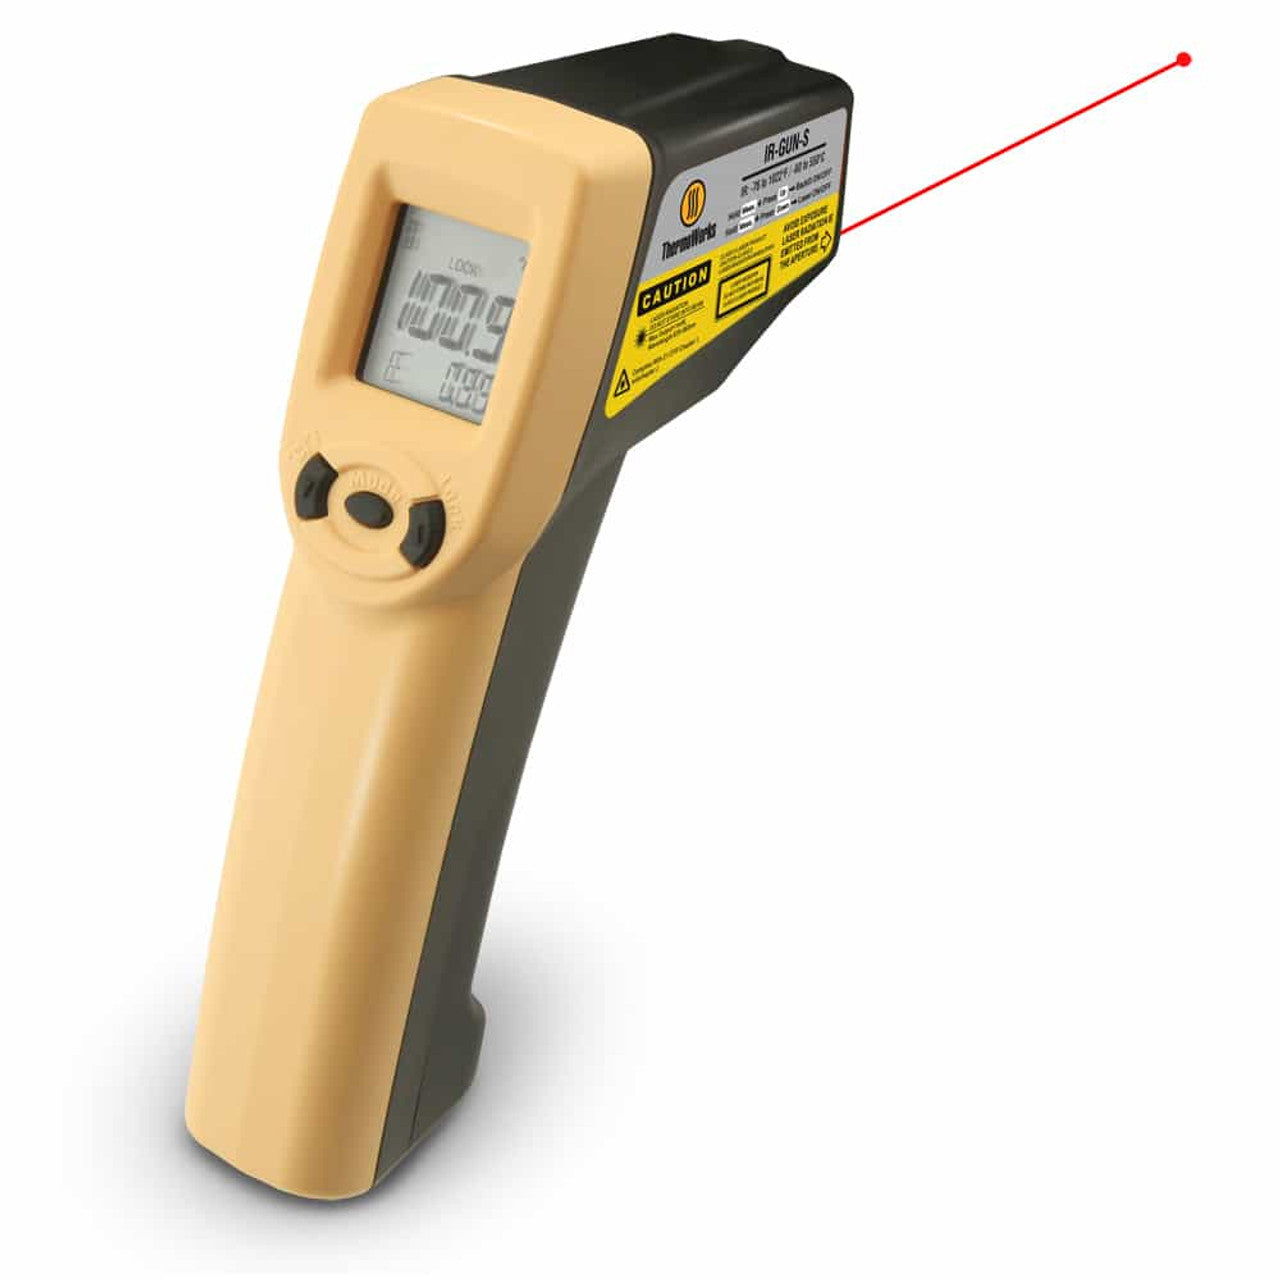 ThermoWorks Industrial Infrared Thermometer ThermoWorks Indigo Pool Patio BBQ